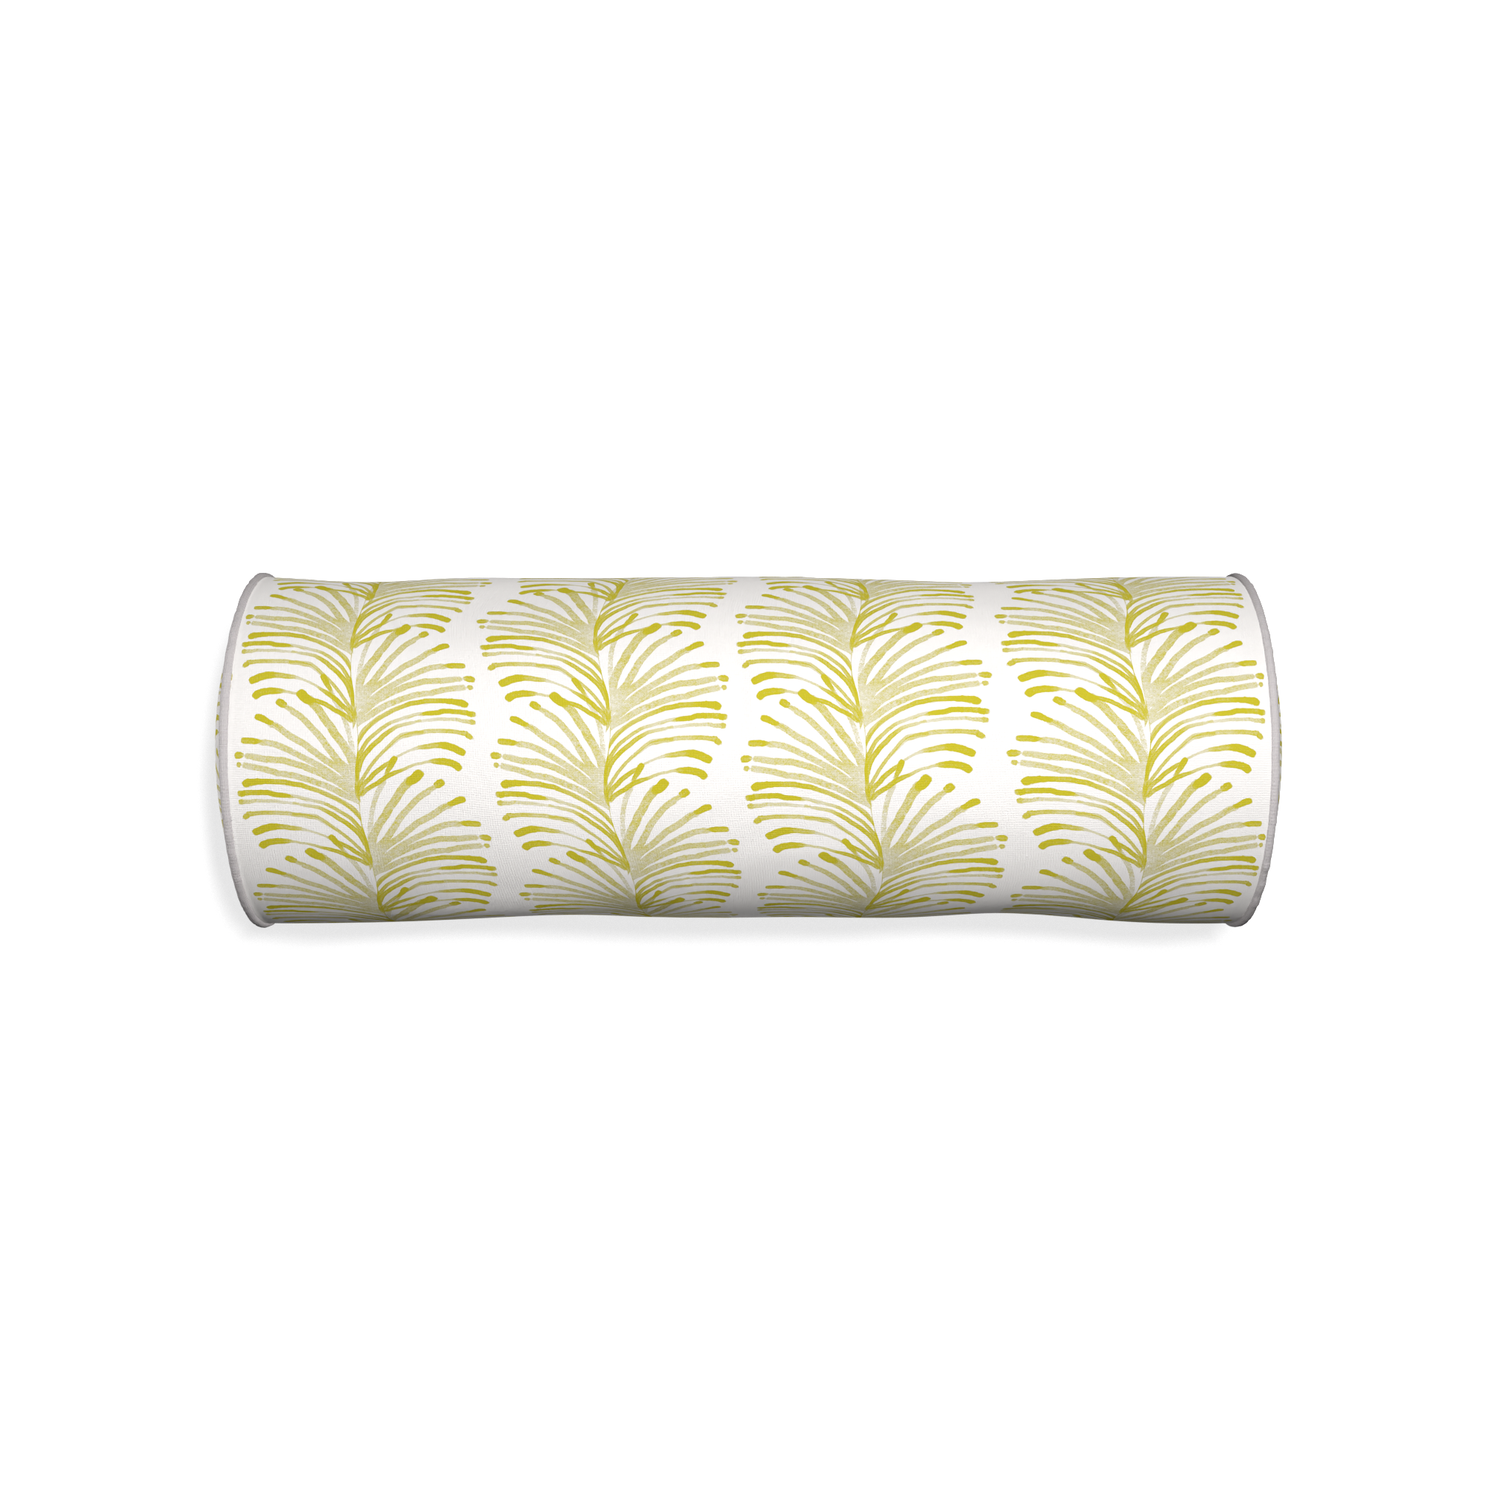 Bolster emma chartreuse custom yellow stripe chartreusepillow with pebble piping on white background